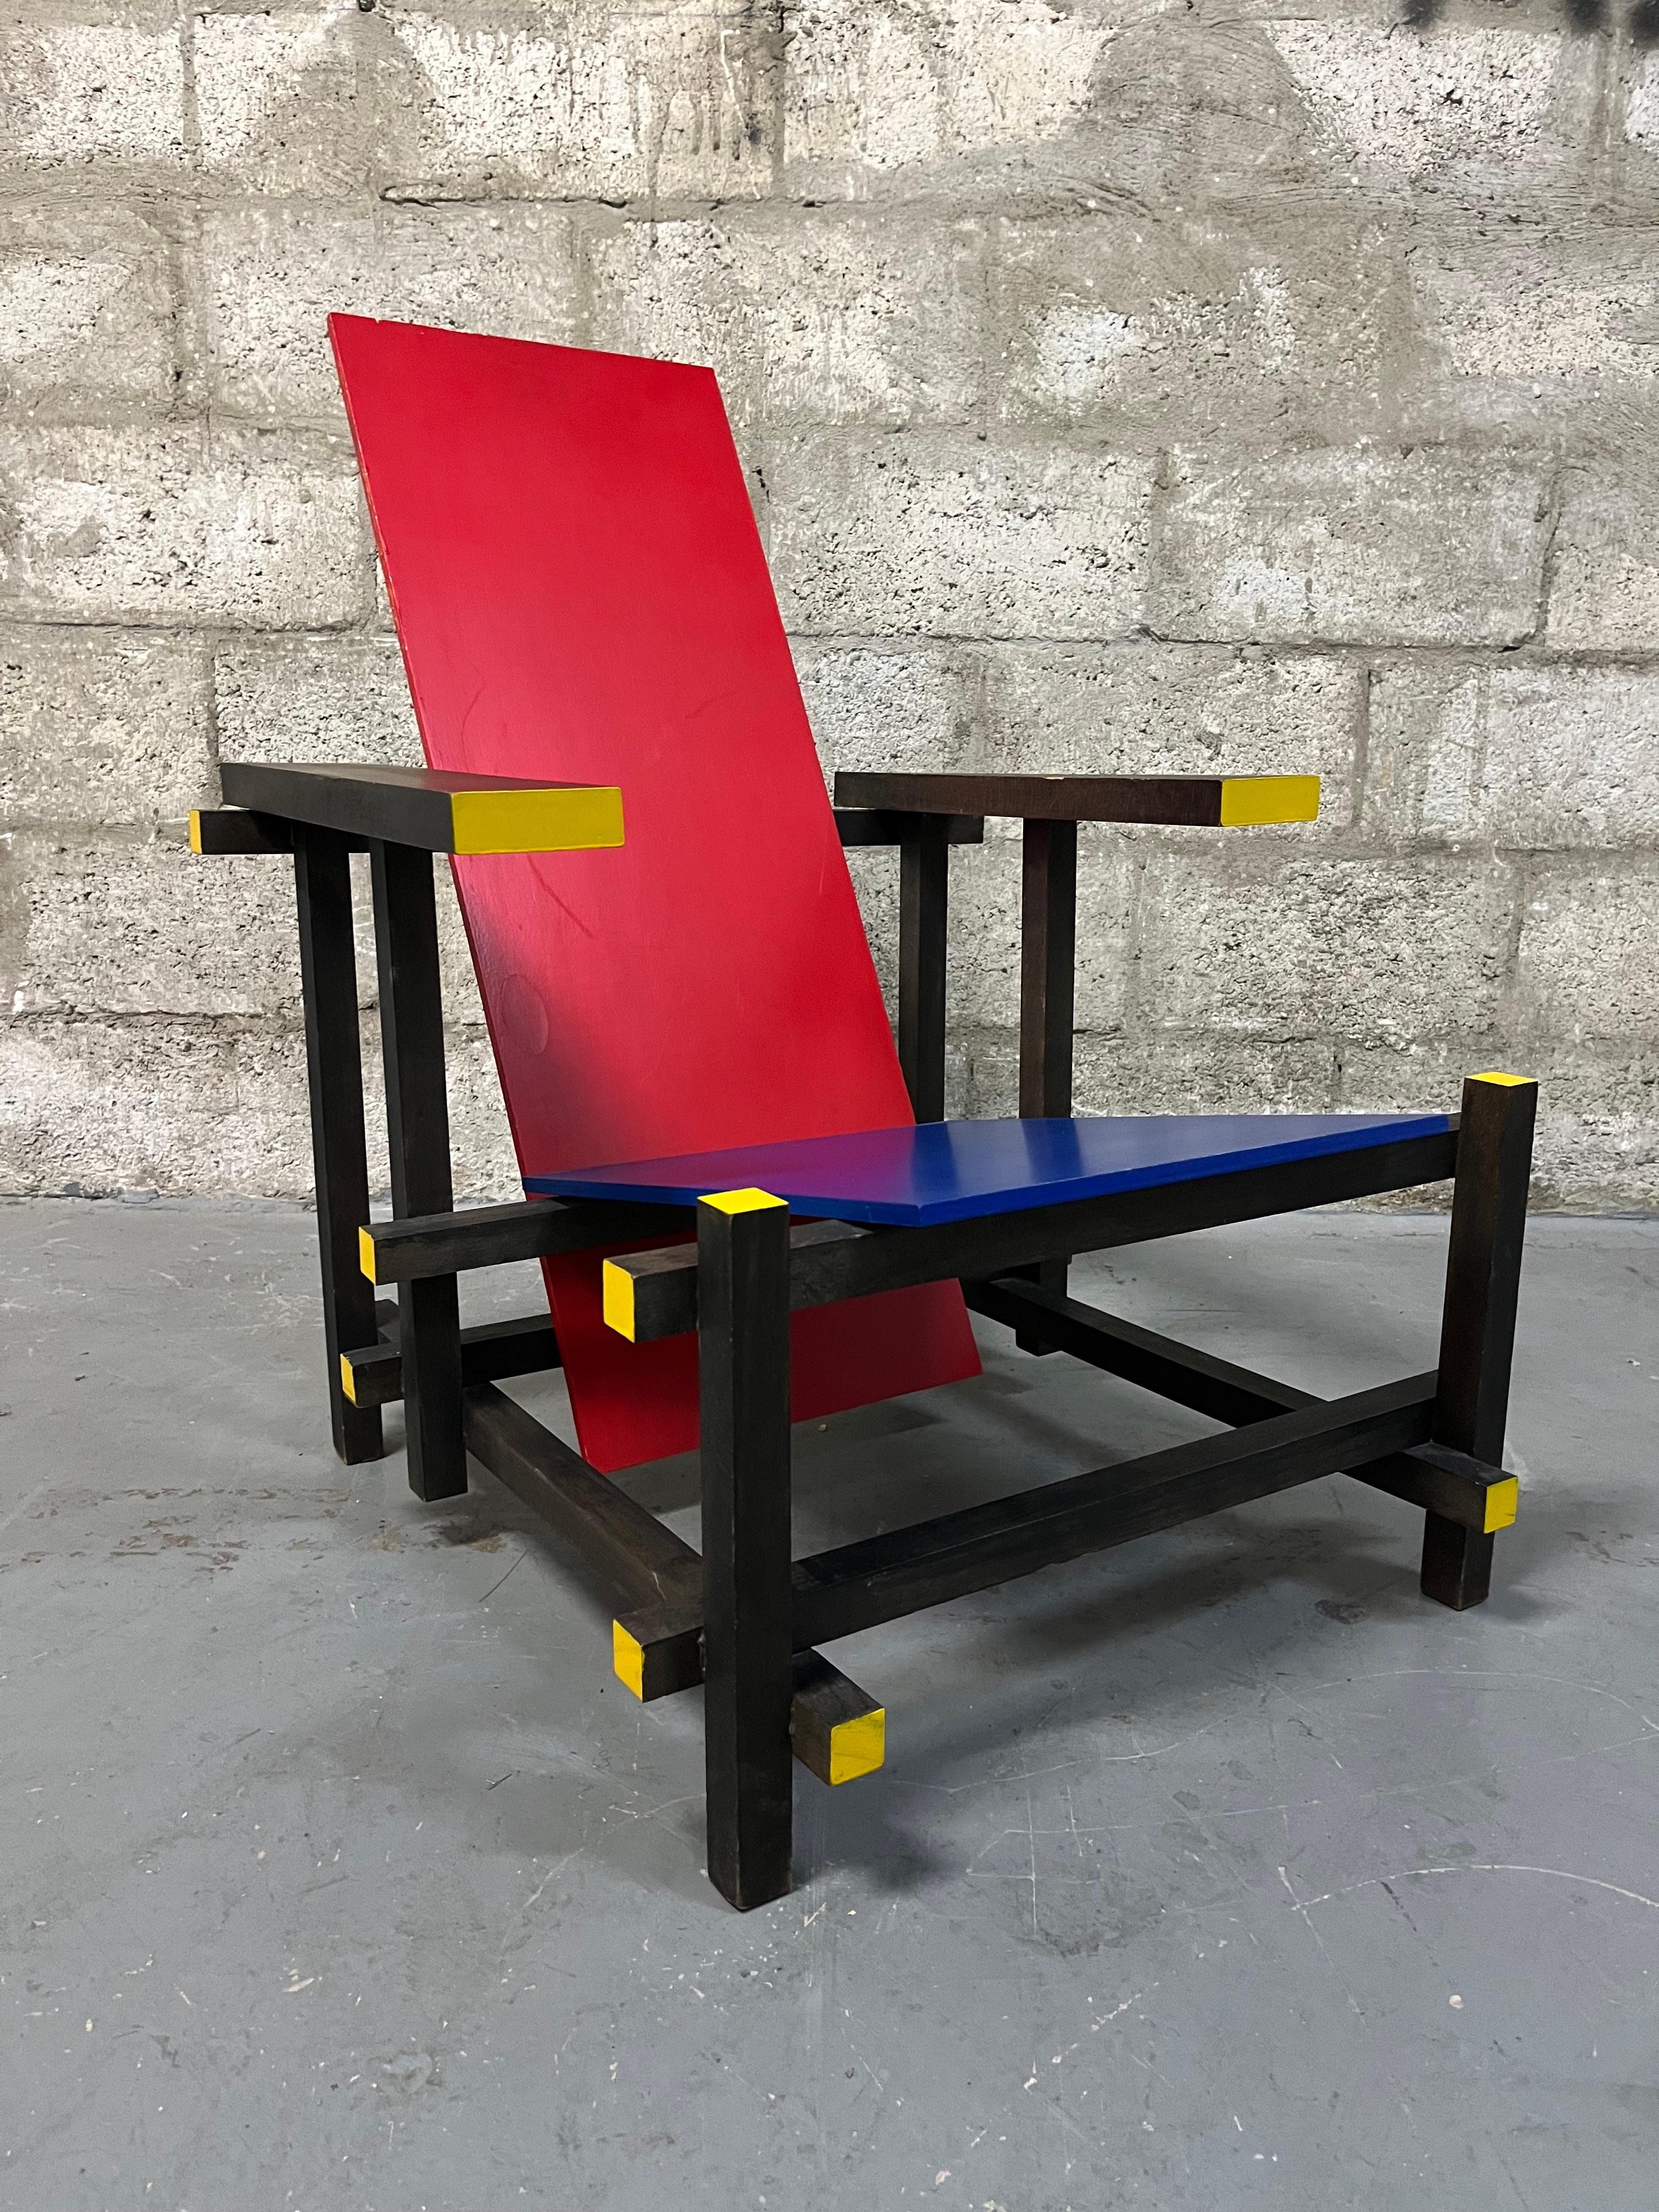 Vintage Handcrafted Reproduction of Gerrit Rietveld's Red and Blue Chair. Circa 1960s
Designed in 1917 by Dutch Designer Gerrit Rietveld the Red and Blue Chair is perhaps one of the most influential and recognizable furniture designs of the